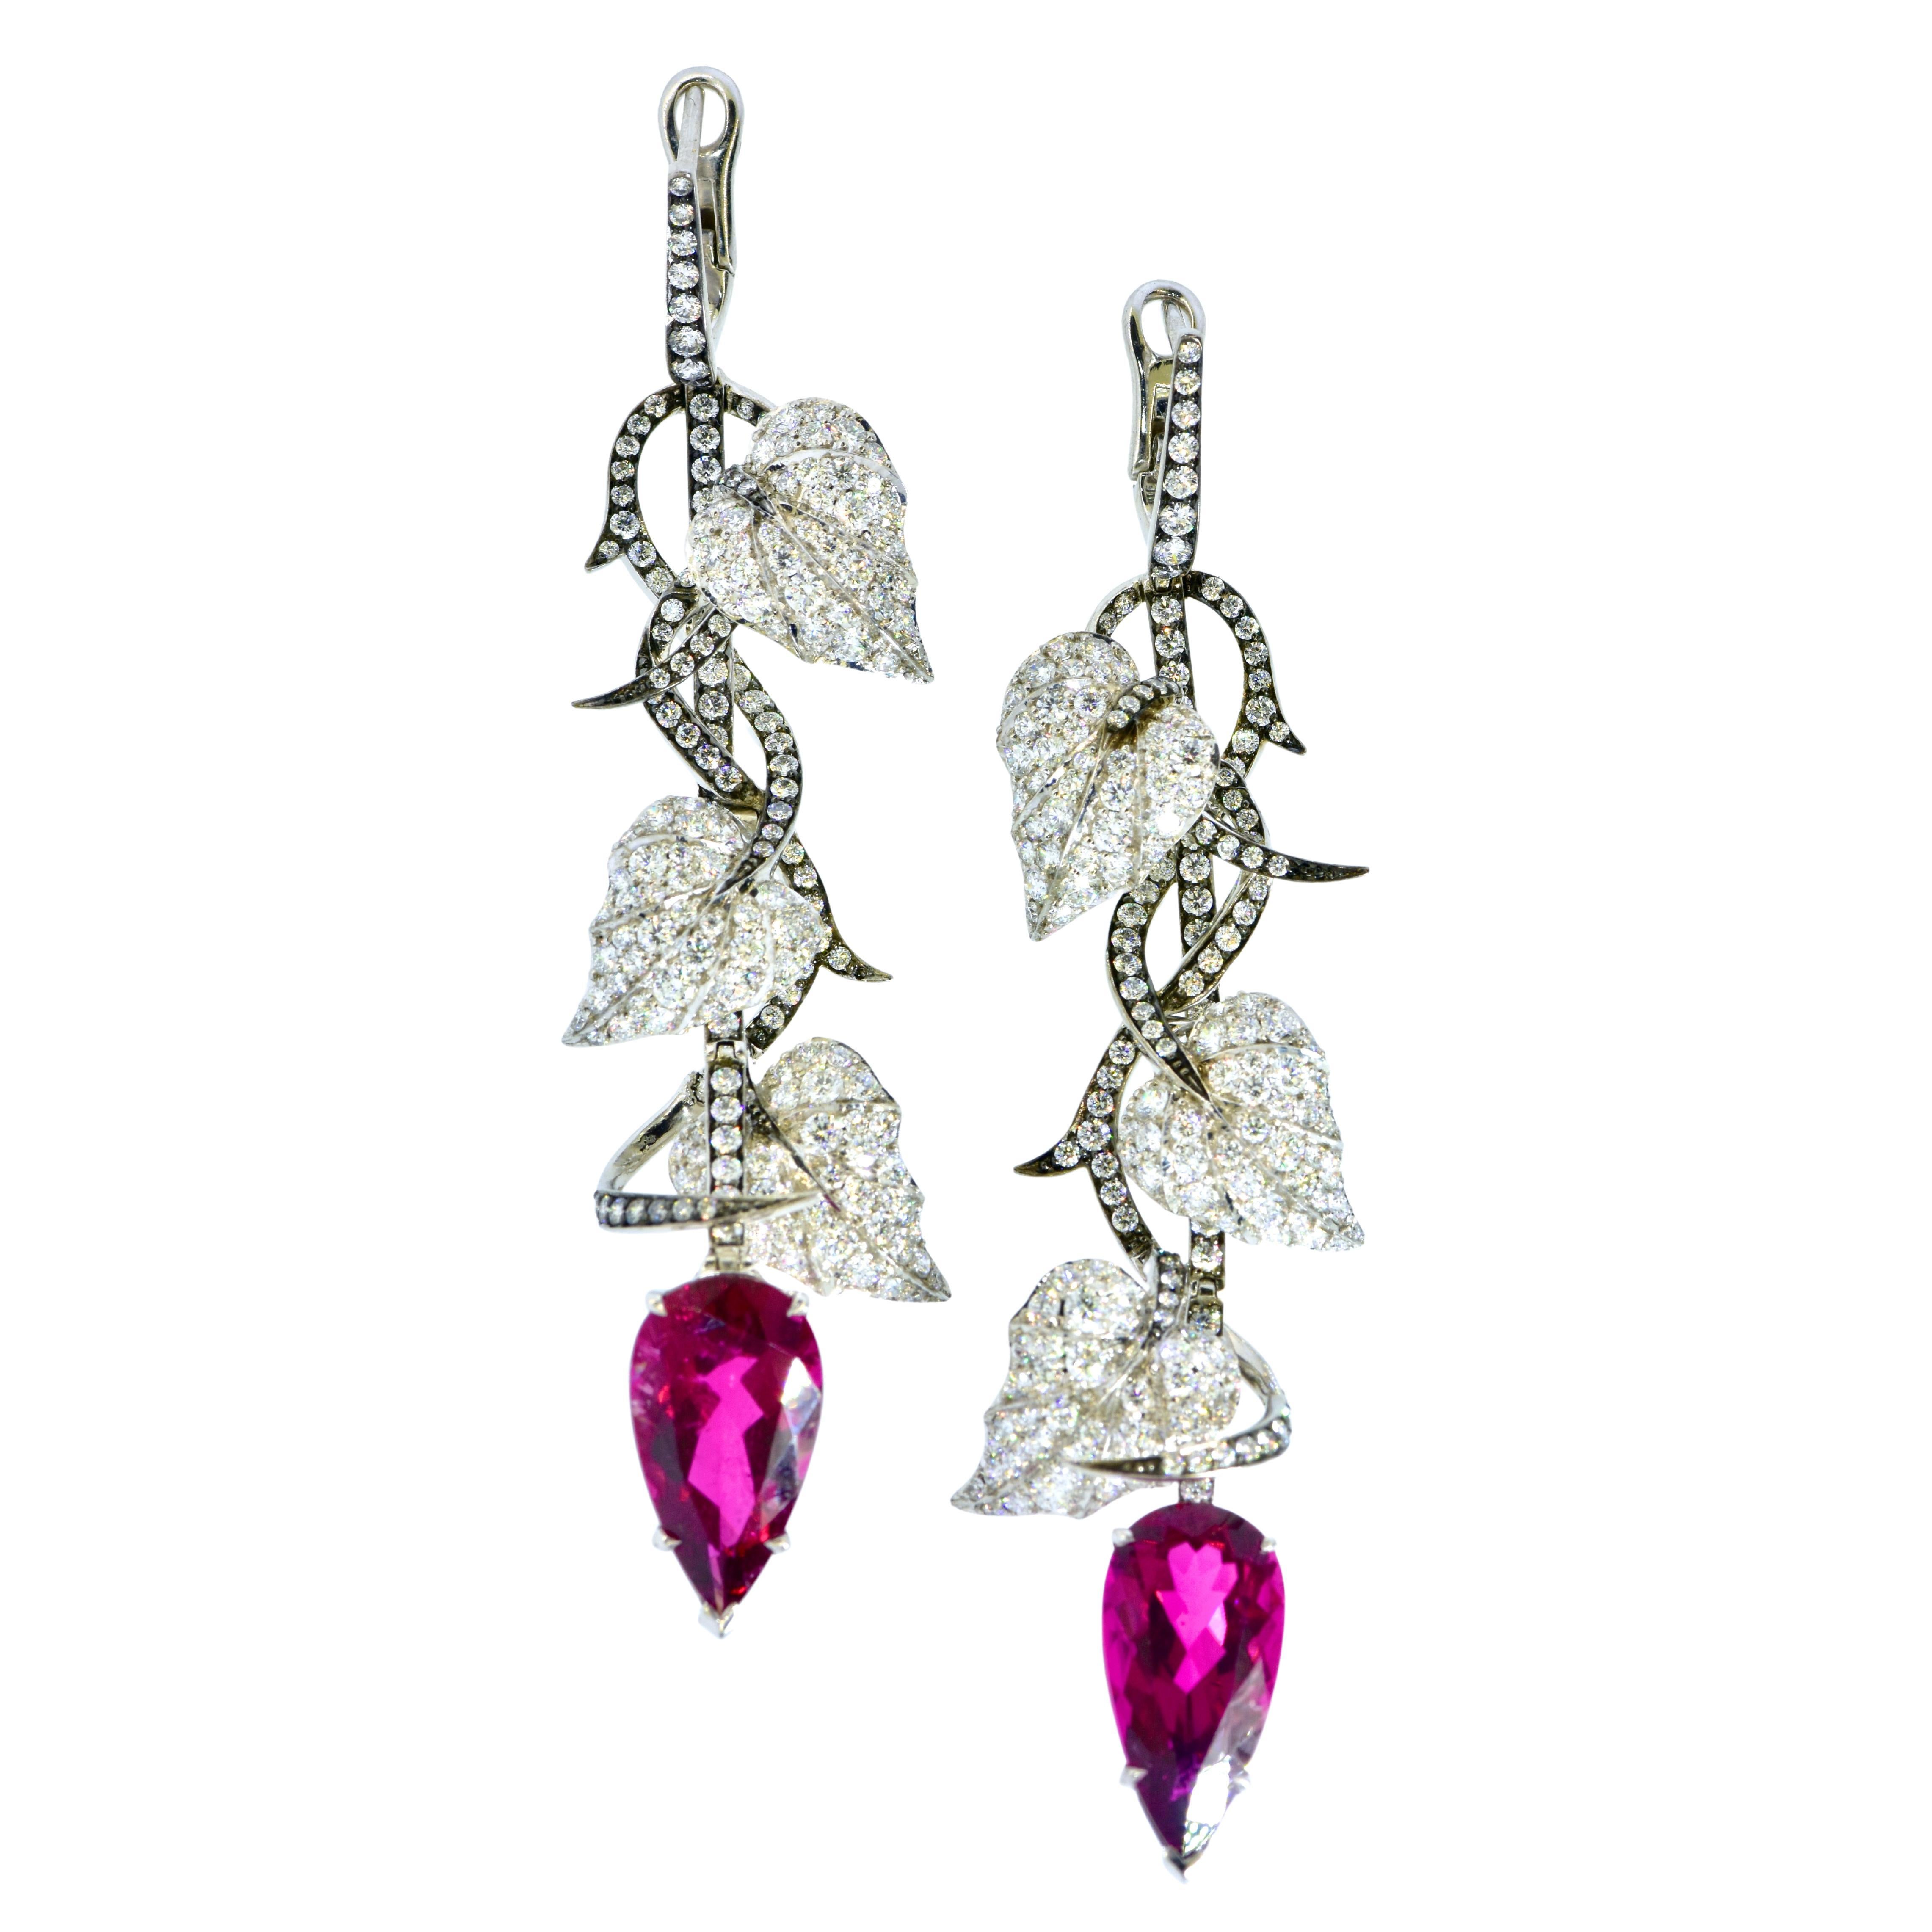 Stephen Webster Rubellite and Diamond Dramatic Hanging Earrings, London, c. 2022 For Sale